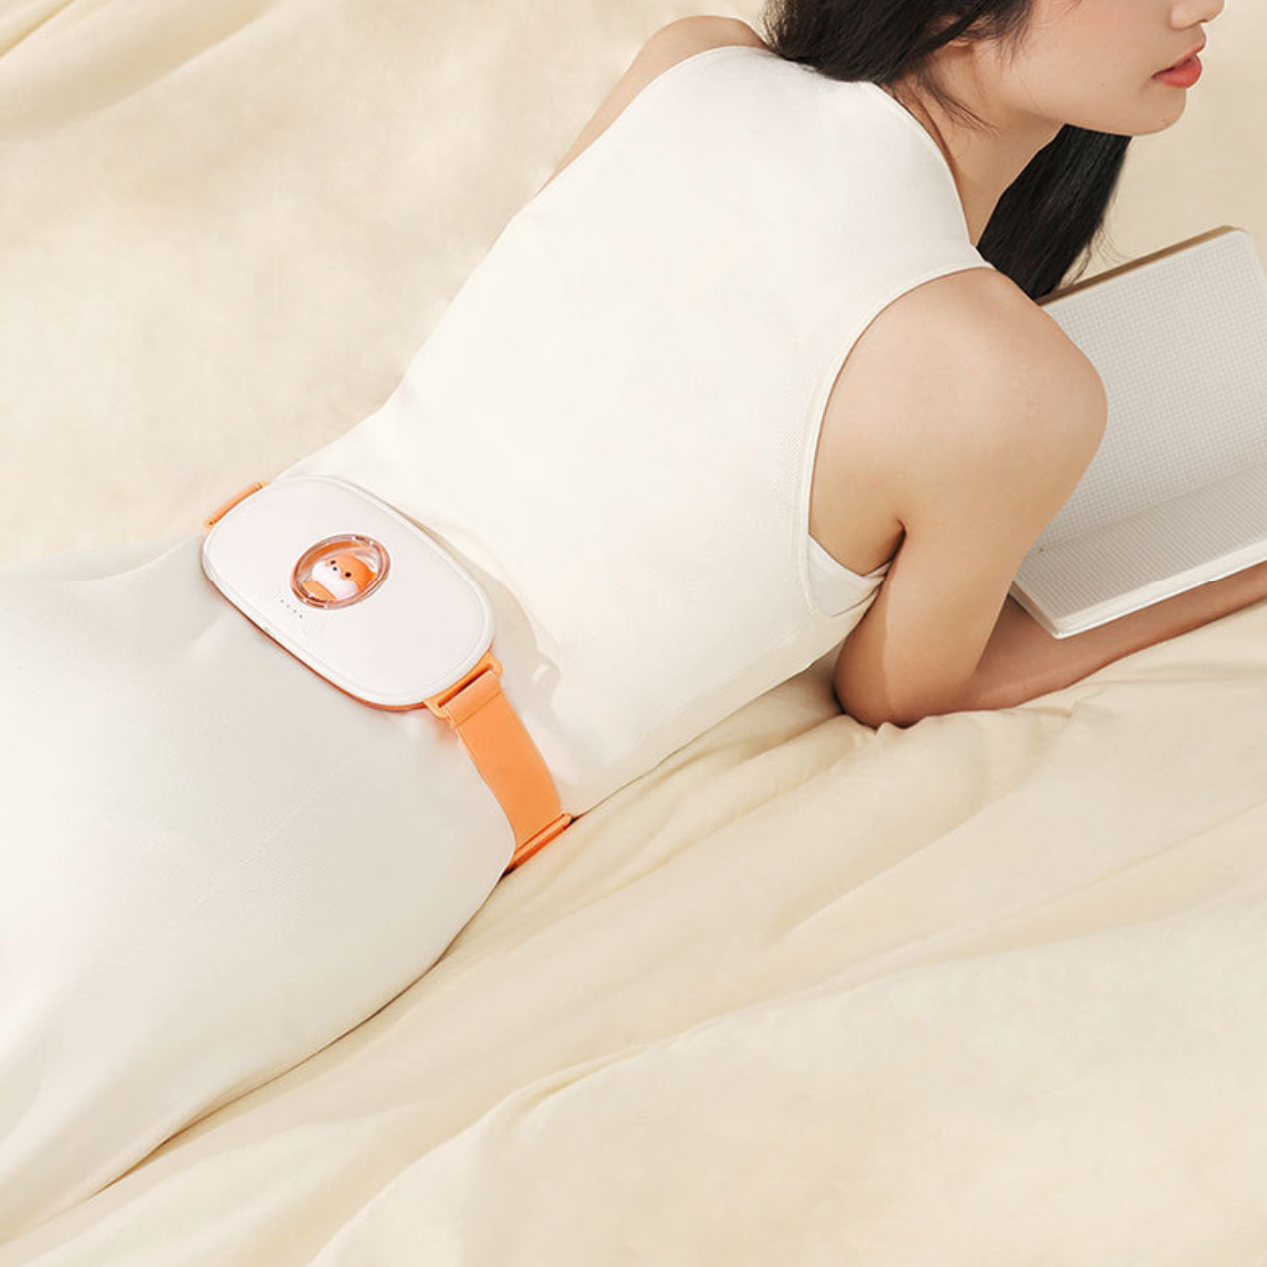 << 1 - 4 DAYS DELIVERY >> Heating Pad For Cramps With Waist Belt